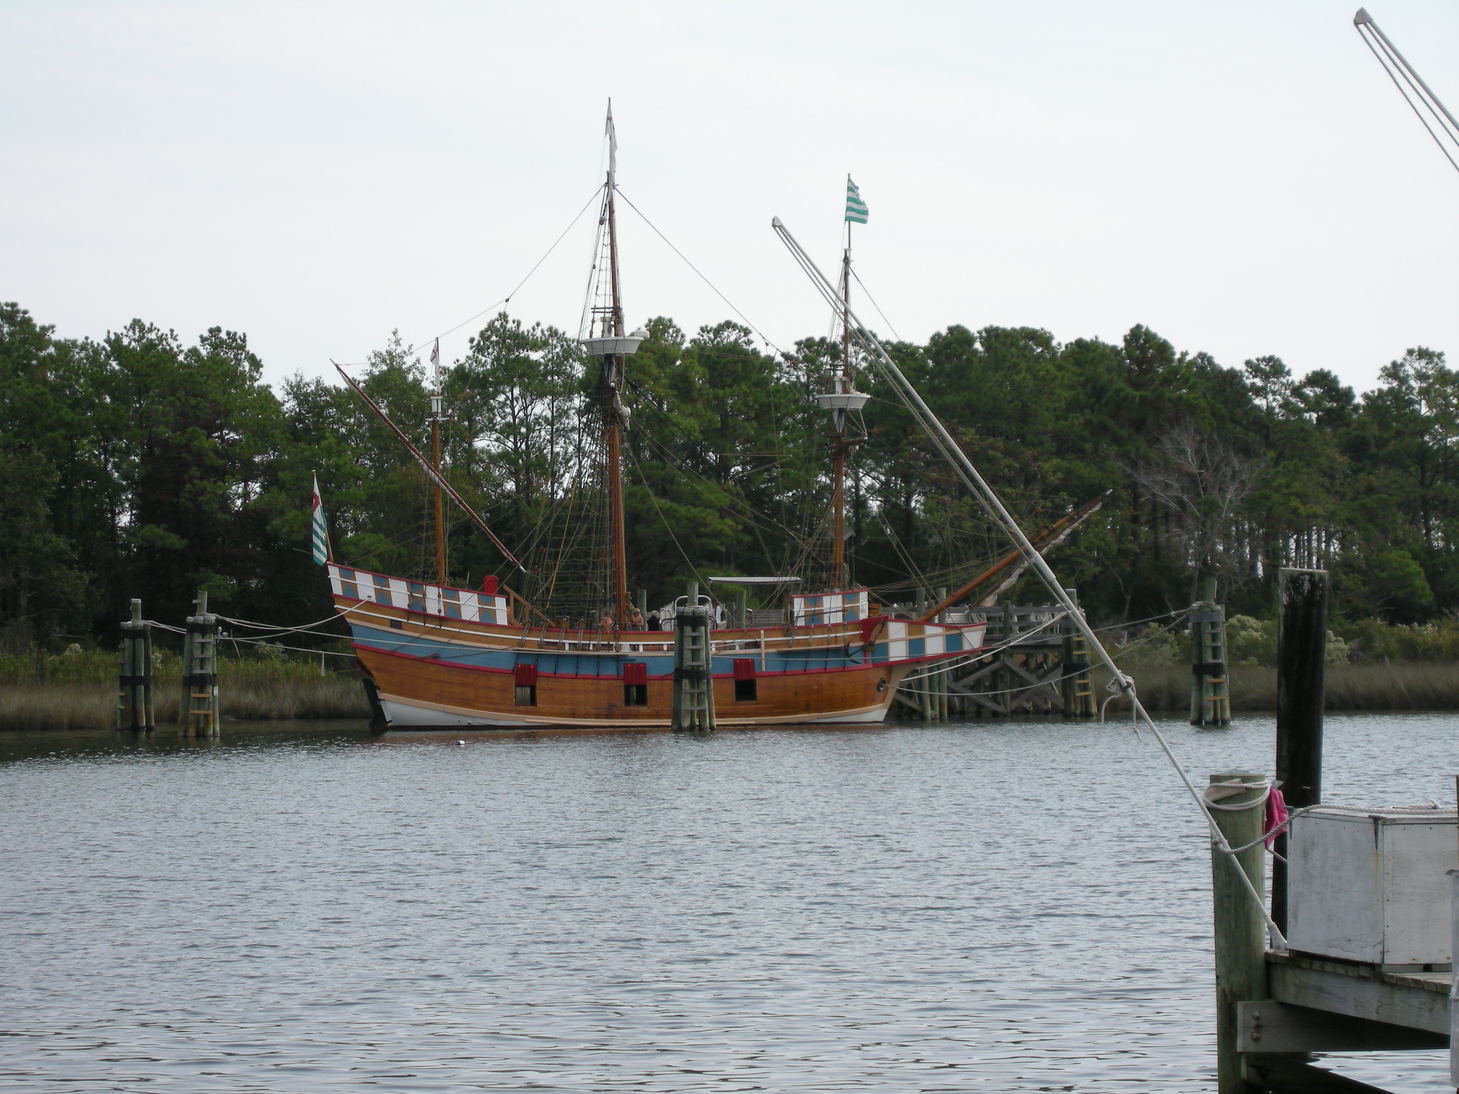 Manteo, NC: View of Festival Park from waterfront